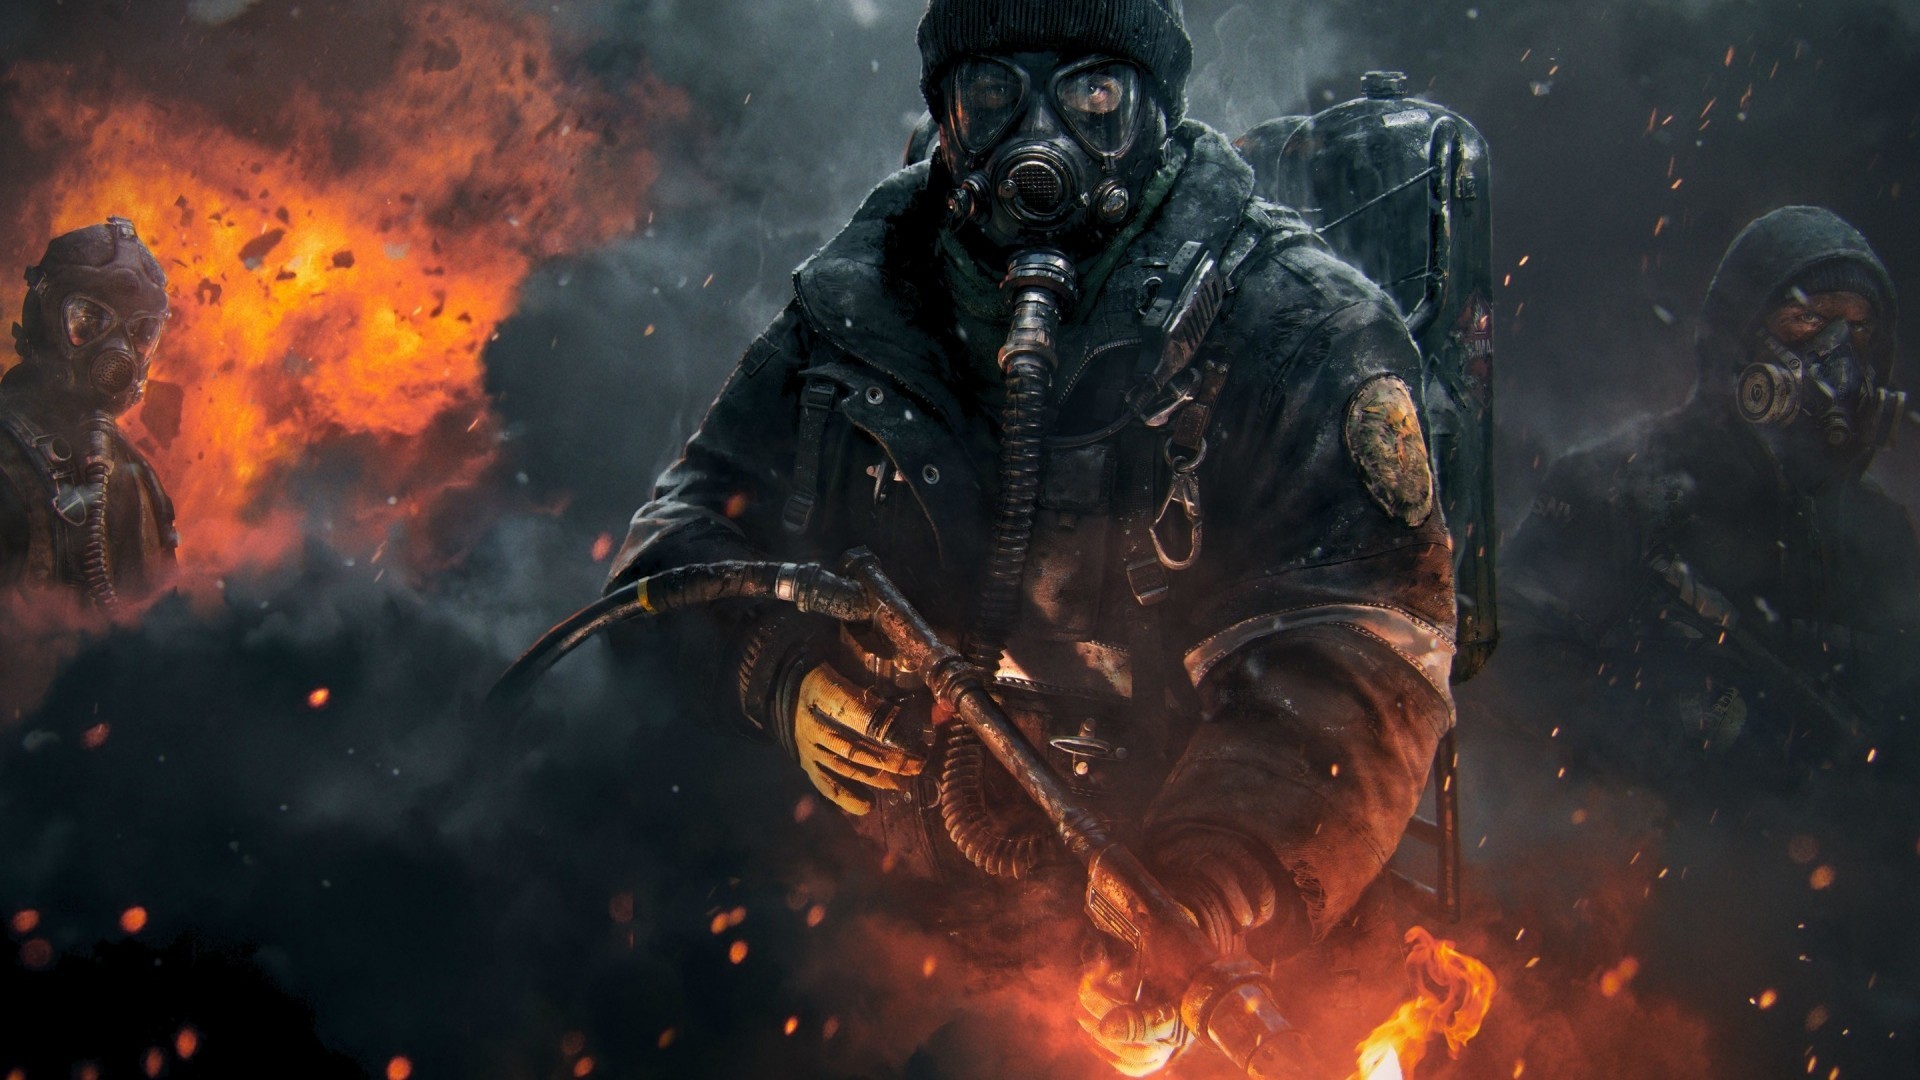 1920x1080 Full HD Wallpaper tom clancy's the division smoke soldier fire explosion